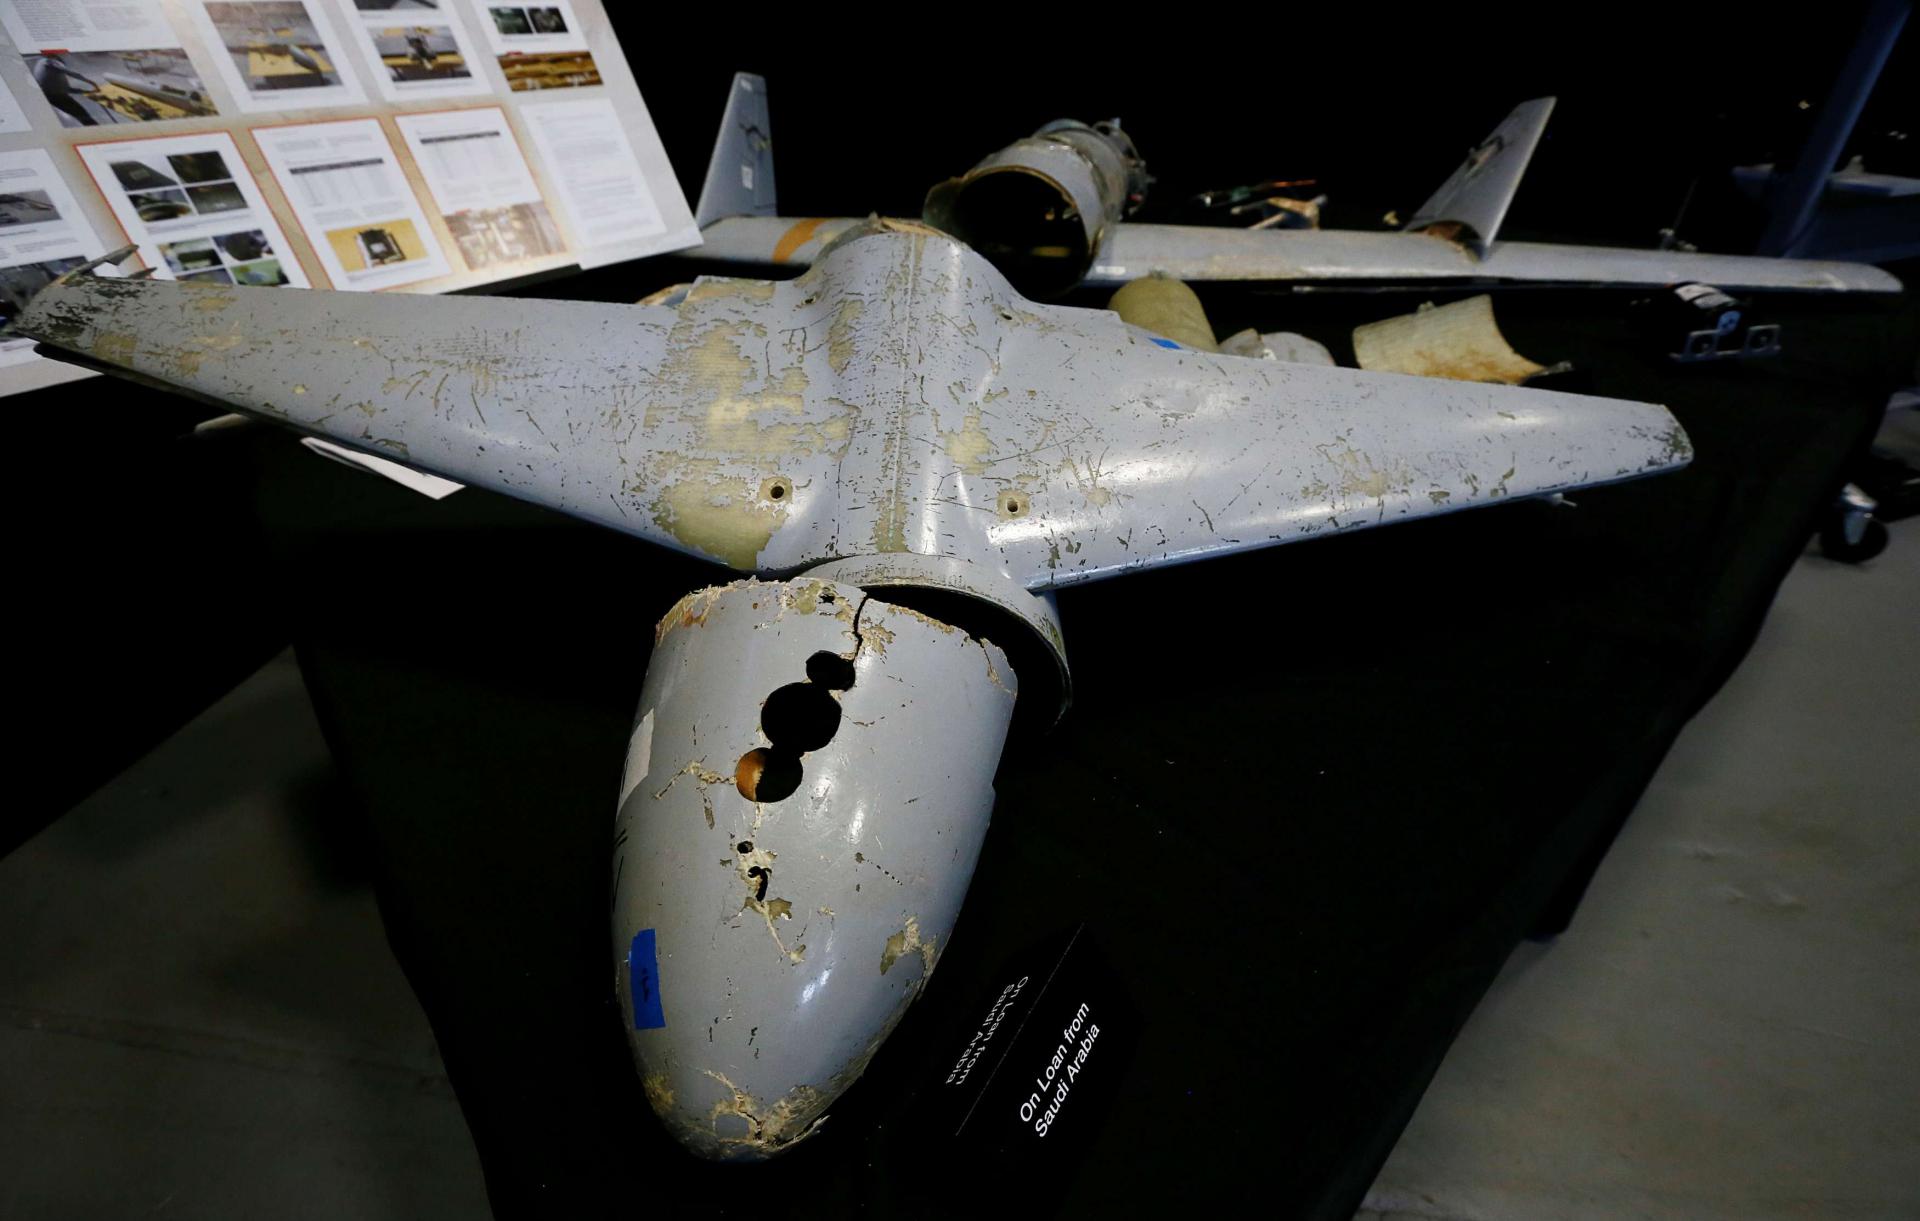 A drone that the Pentagon says was manufactured in Iran but recovered in Yemen, as it sits on display at a military base in Washington